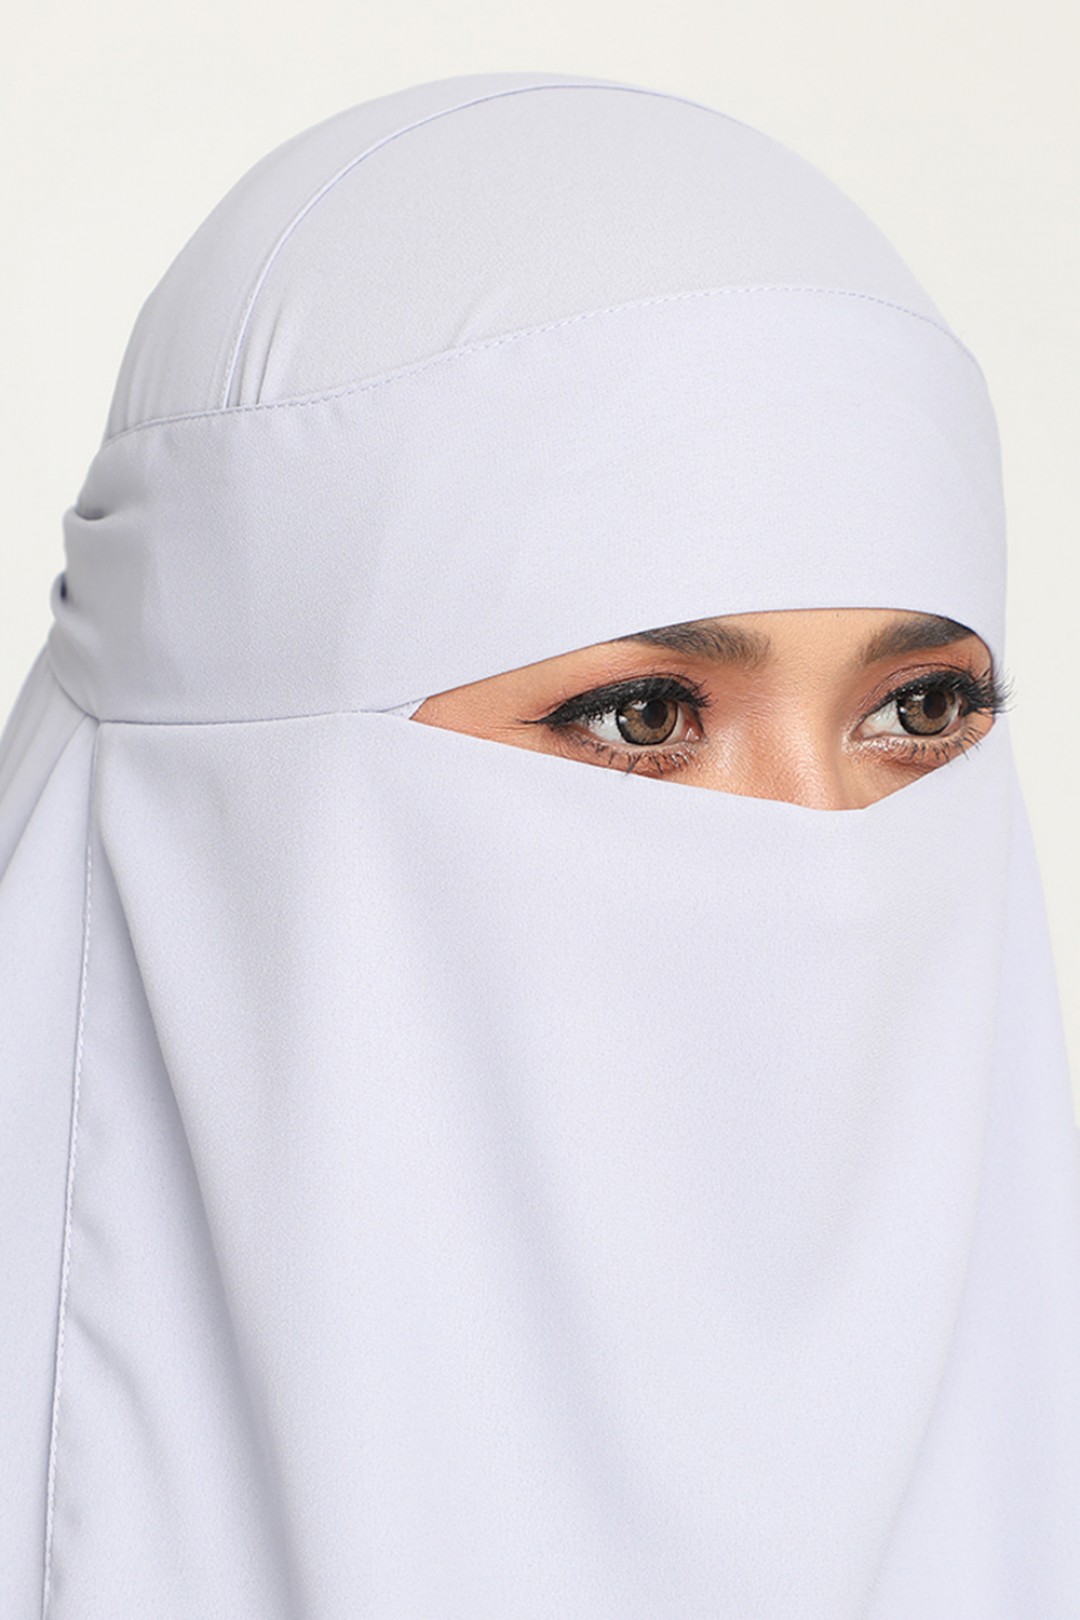 As-Is Niqab June Berry